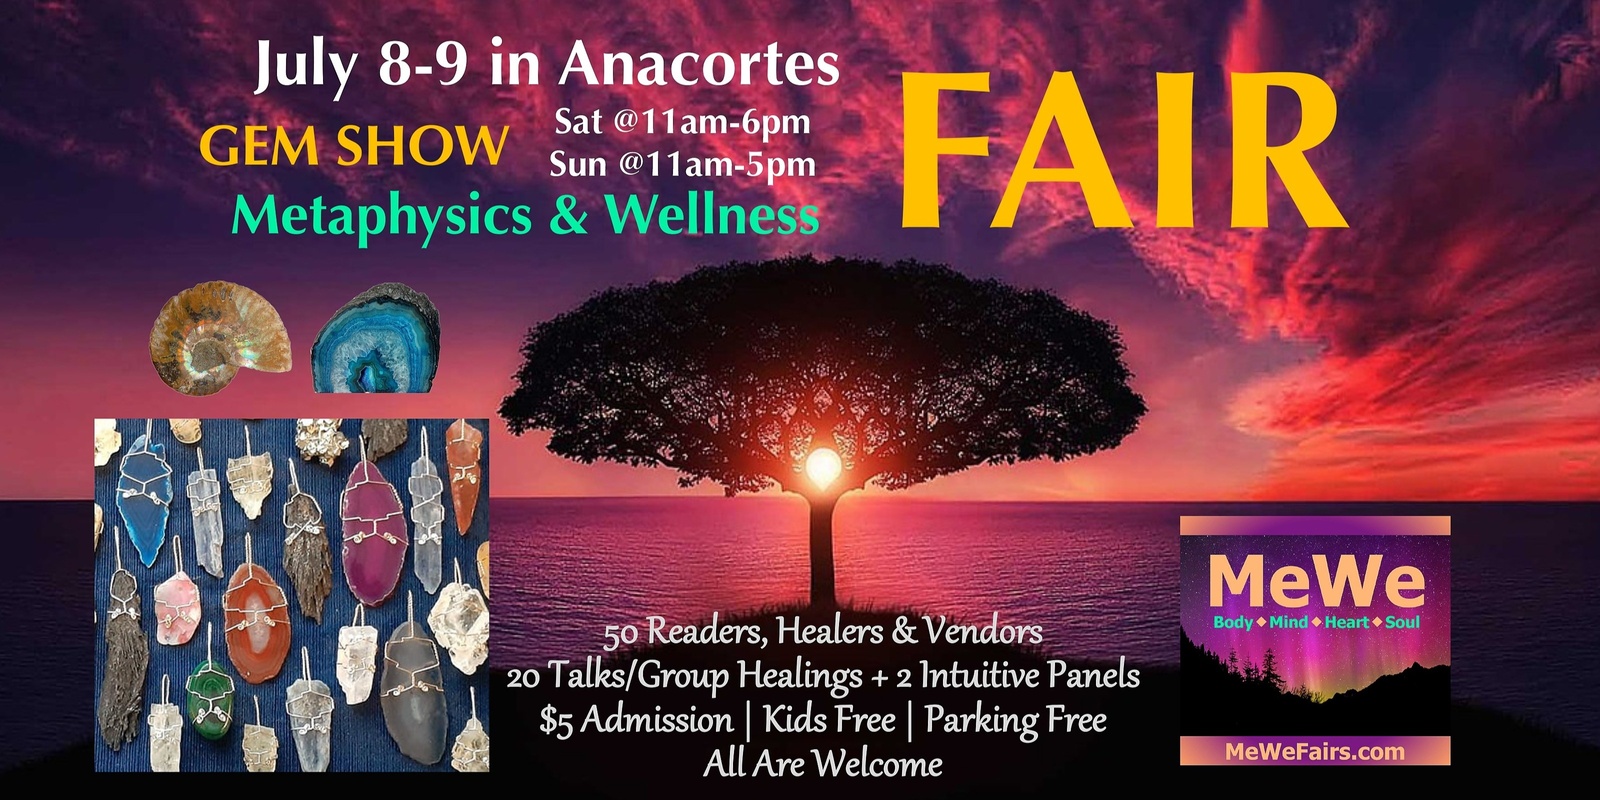 Banner image for Metaphysics & Wellness MeWe Fair + Gem Show in Anacortes, 50 Booths / 20 Talks